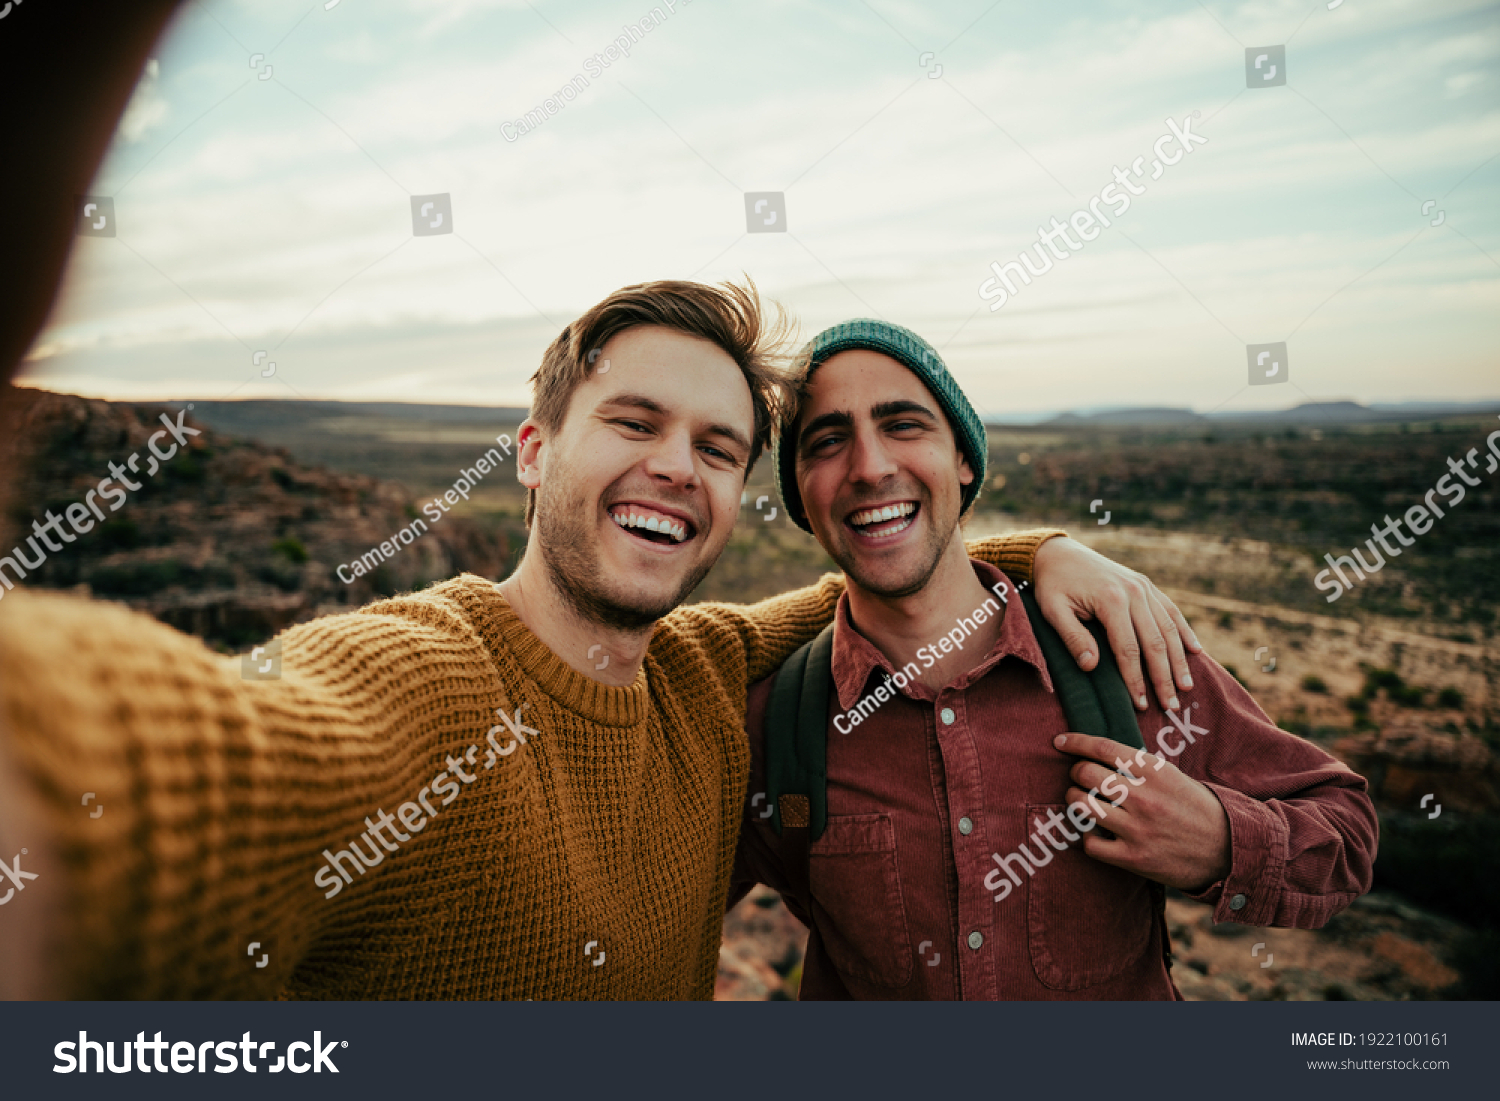 Caucasian male friends hiking in wilderness taking selfie with cellular device embracing the outdoors #1922100161